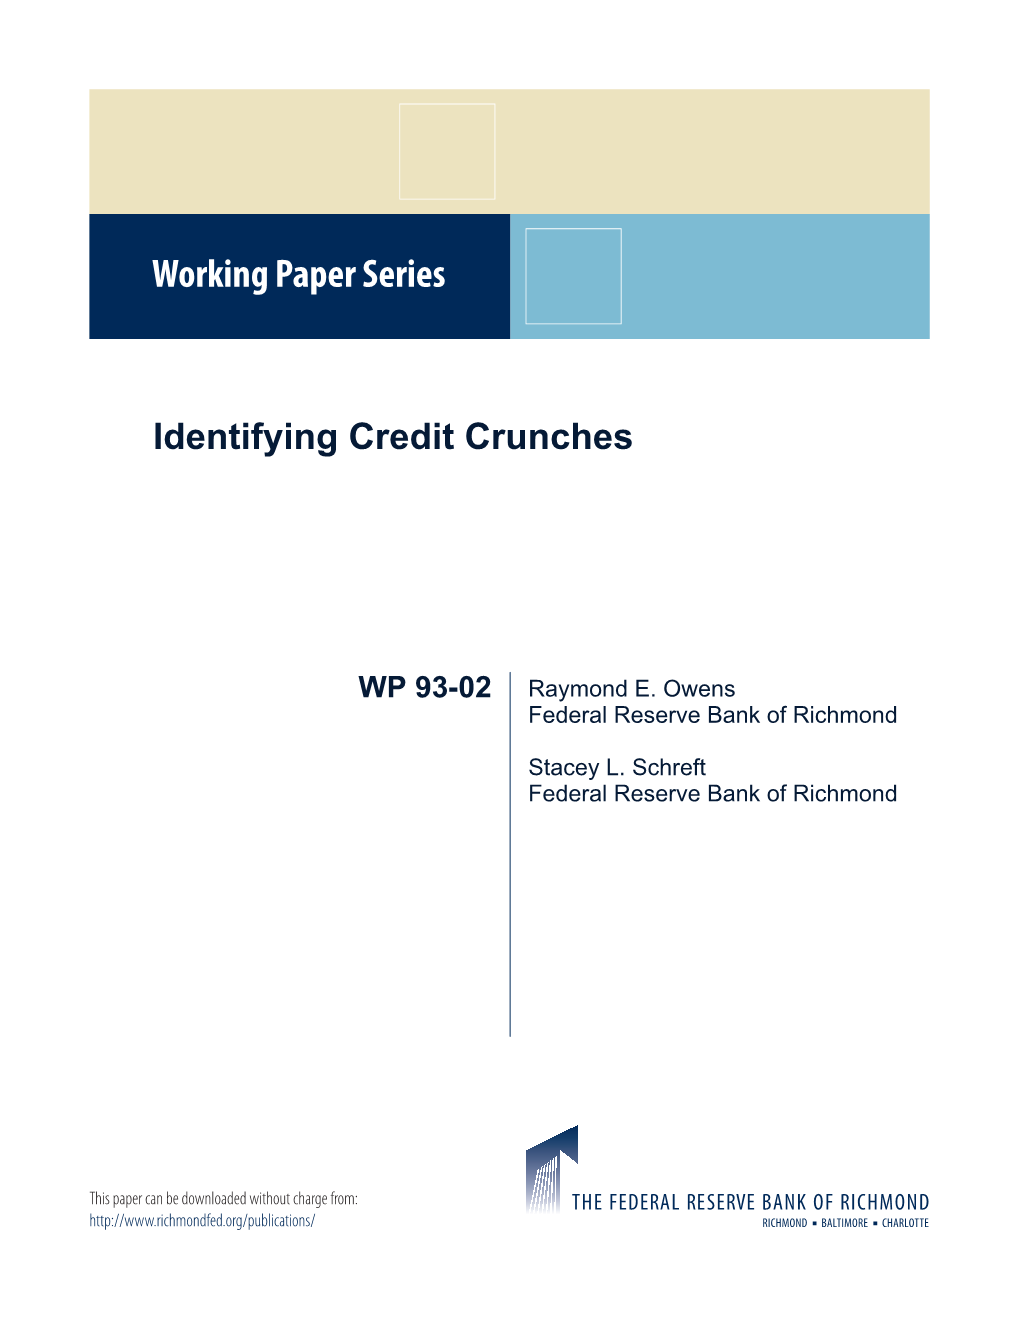 Identifying Credit Crunches," Contemporary Economic Policy, April 1995, V